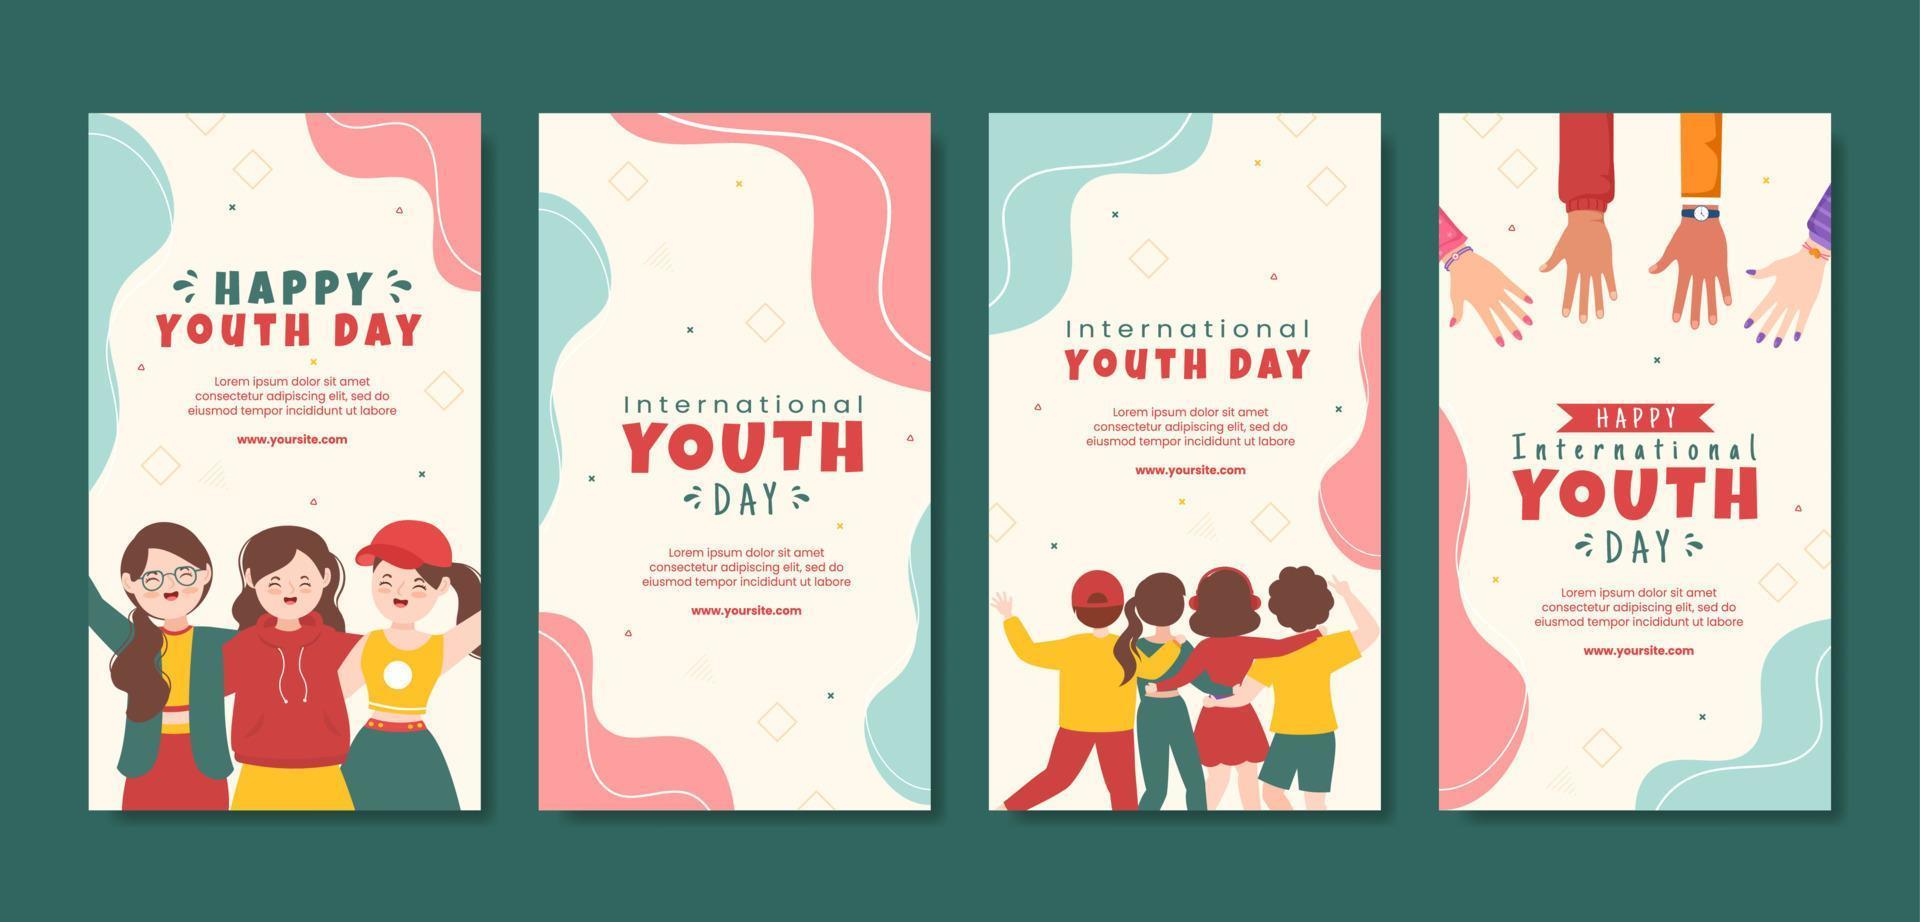 Happy International Youth Day Social Media Stories Template Flat Cartoon Background Vector Illustration